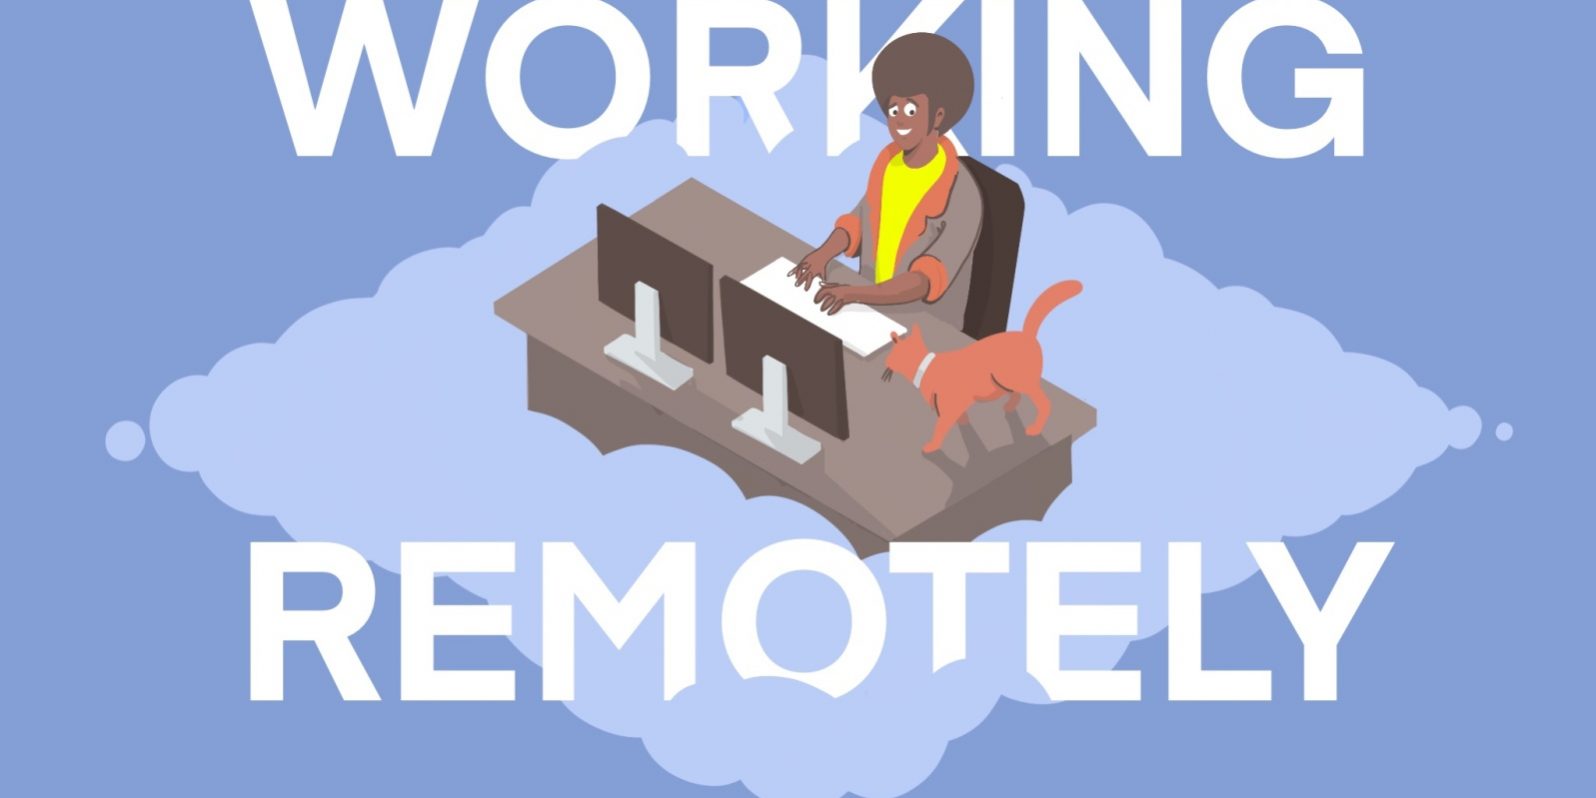 Working Remotely by Brian J Russell